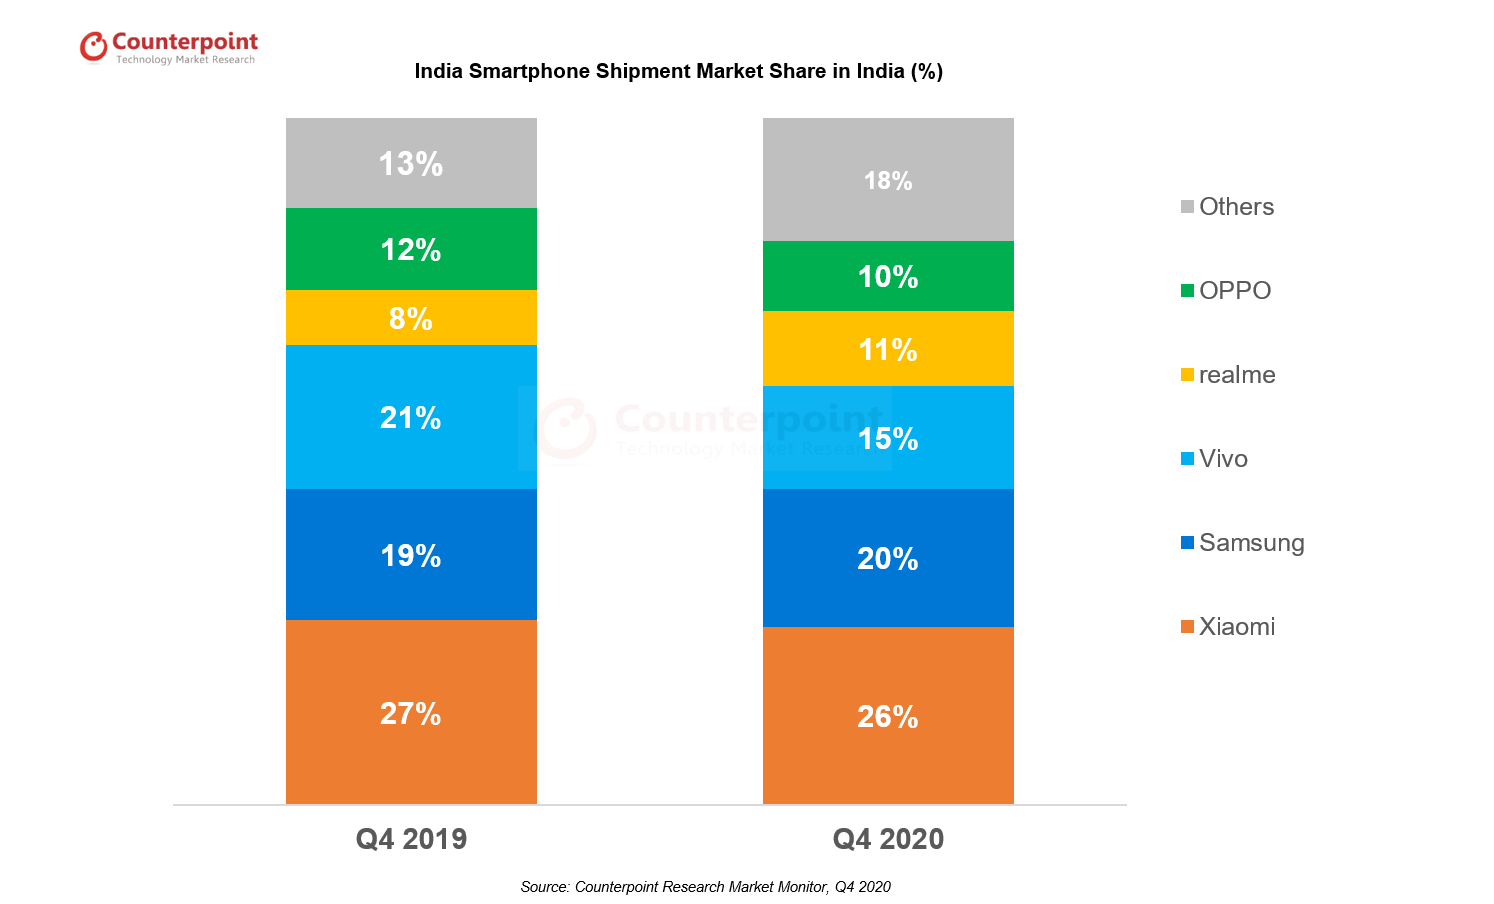 Riset Counterpoint Pasar Smartphone India Q4 2020